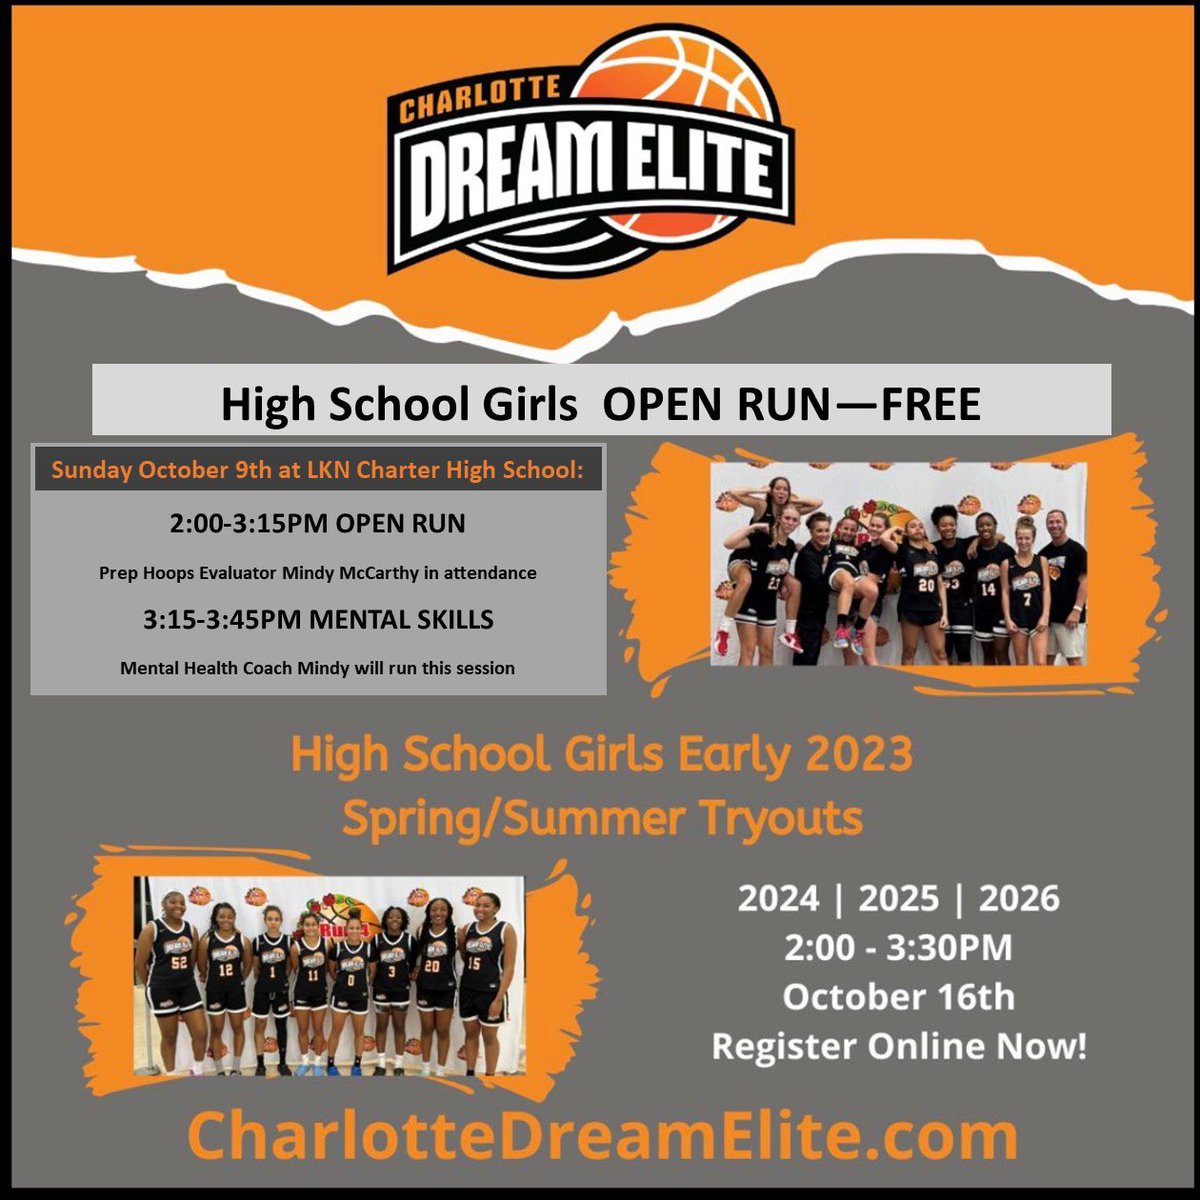 💥FREE HS GIRLS OPEN RUN SUNDAY OCTOBER 9th 2:00PM! Updated location. 💥@Mindy_McCarthy3 will be in attendance AND she will talk about the importance of MENTAL SKILLS‼️ 💥Details on graphic. Register here: CharlotteDreamElite.com/waiver #charlottedreamelite